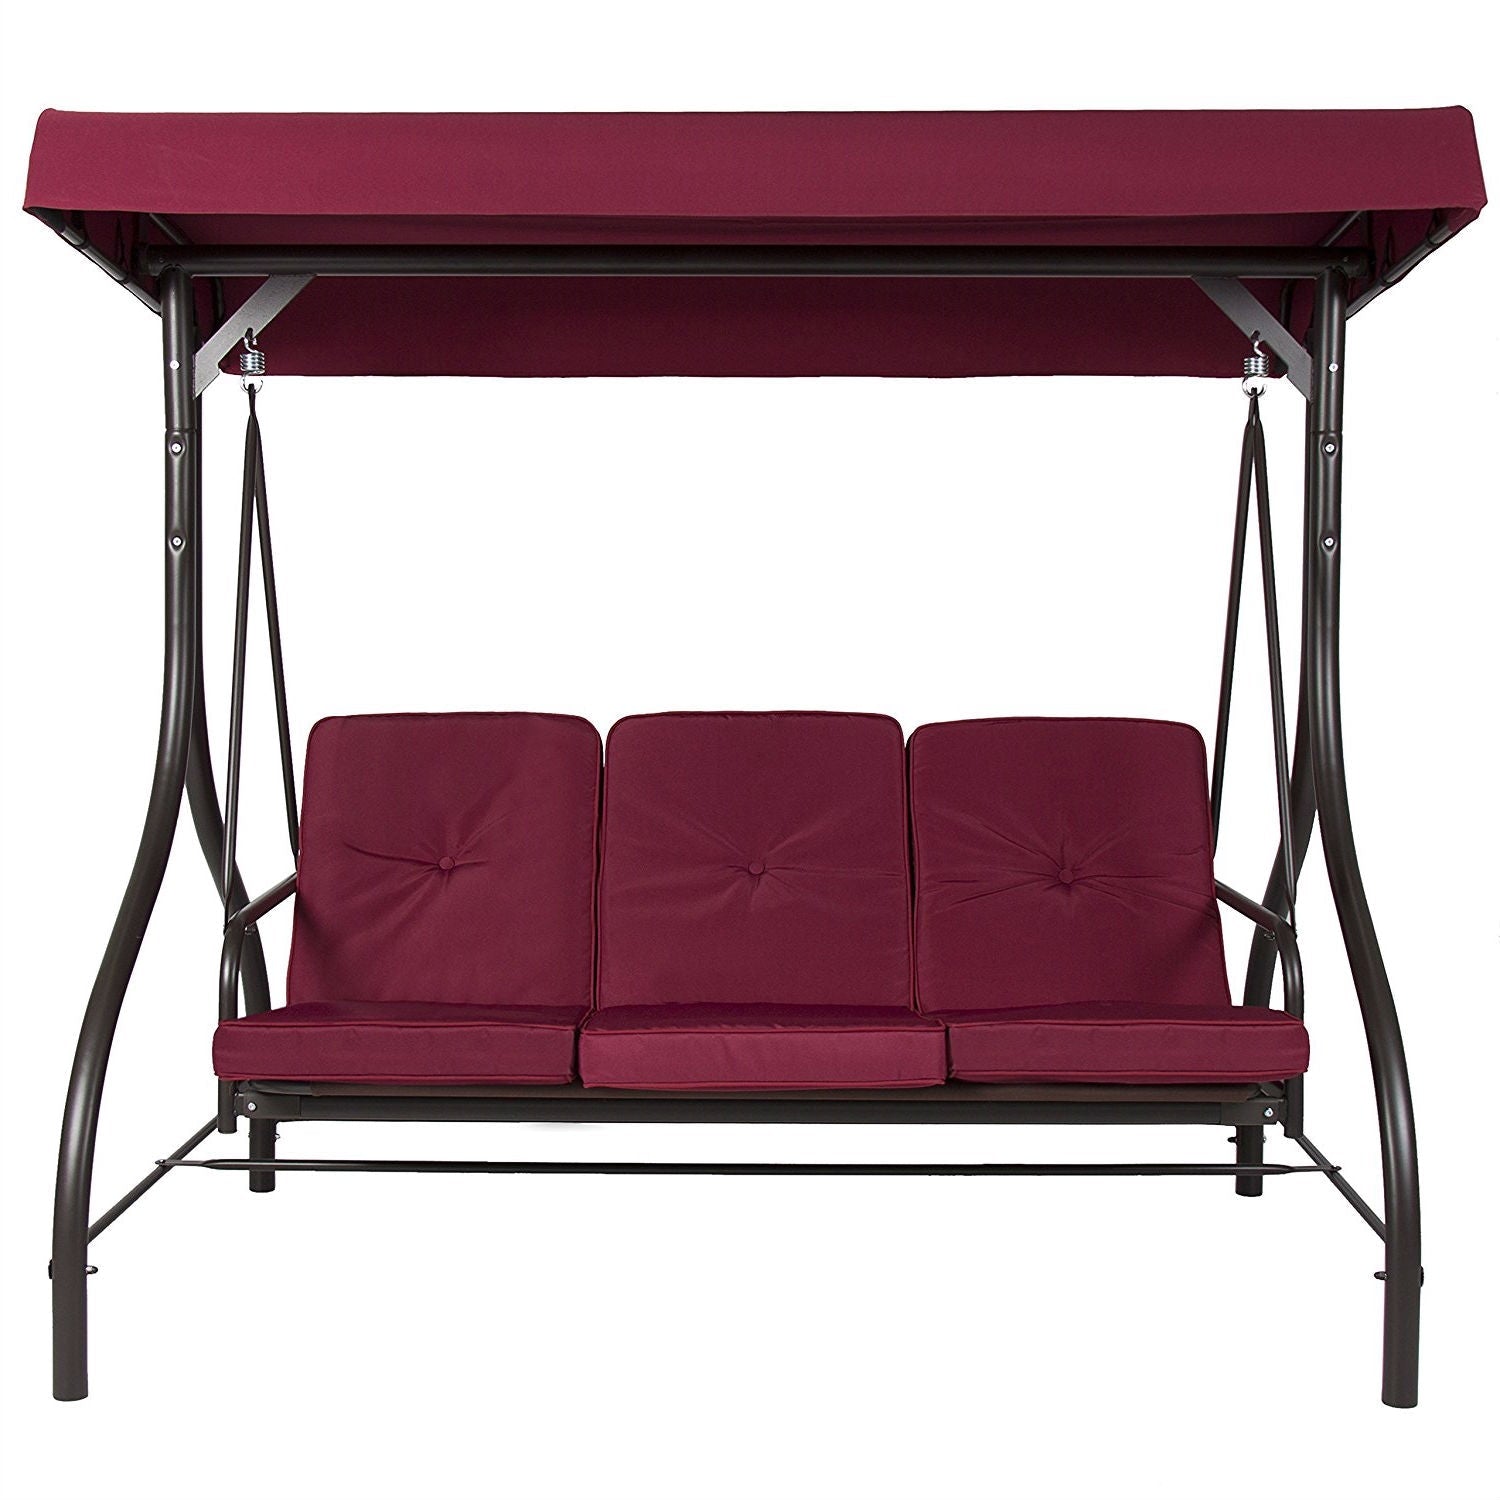 Outdoor > Outdoor Furniture > Porch Swings And Gliders - Burgundy Outdoor Patio Deck Porch Canopy Swing With Cushions